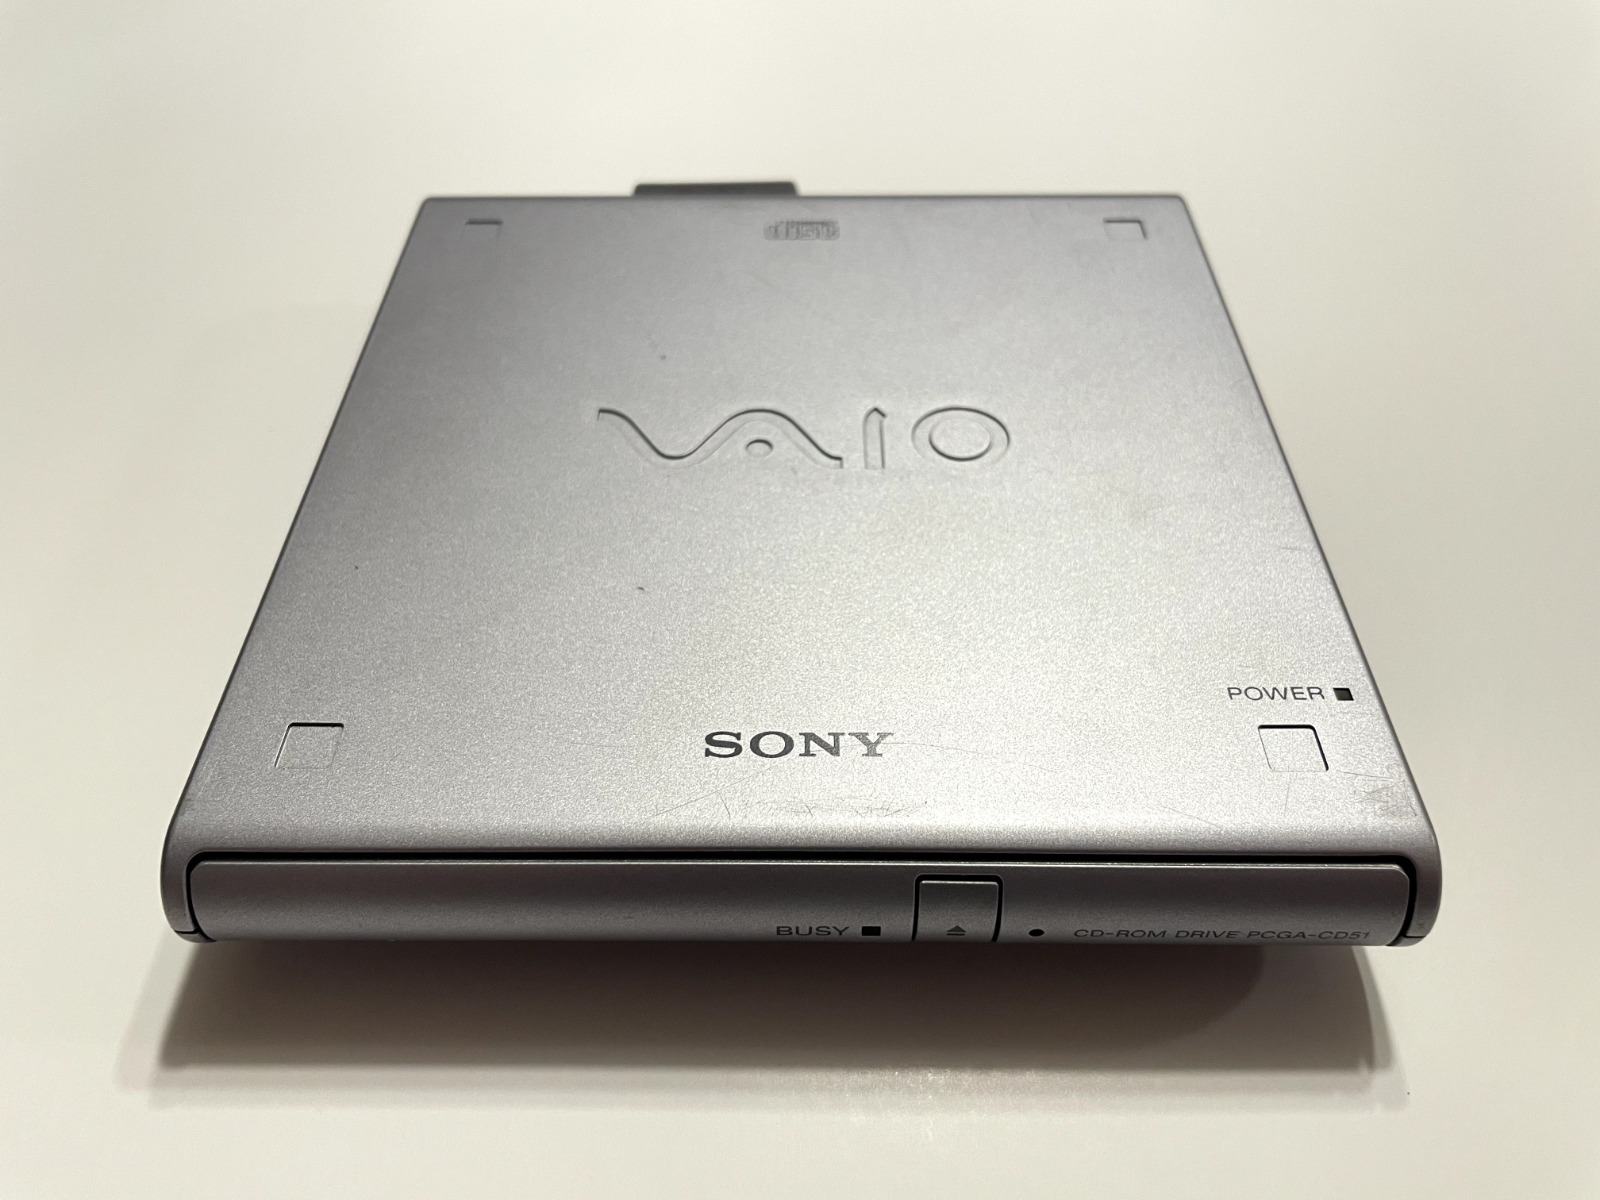 Sony Vaio PCGA-CD51 External Portable CD-ROM Drive Made in Japan - TESTED